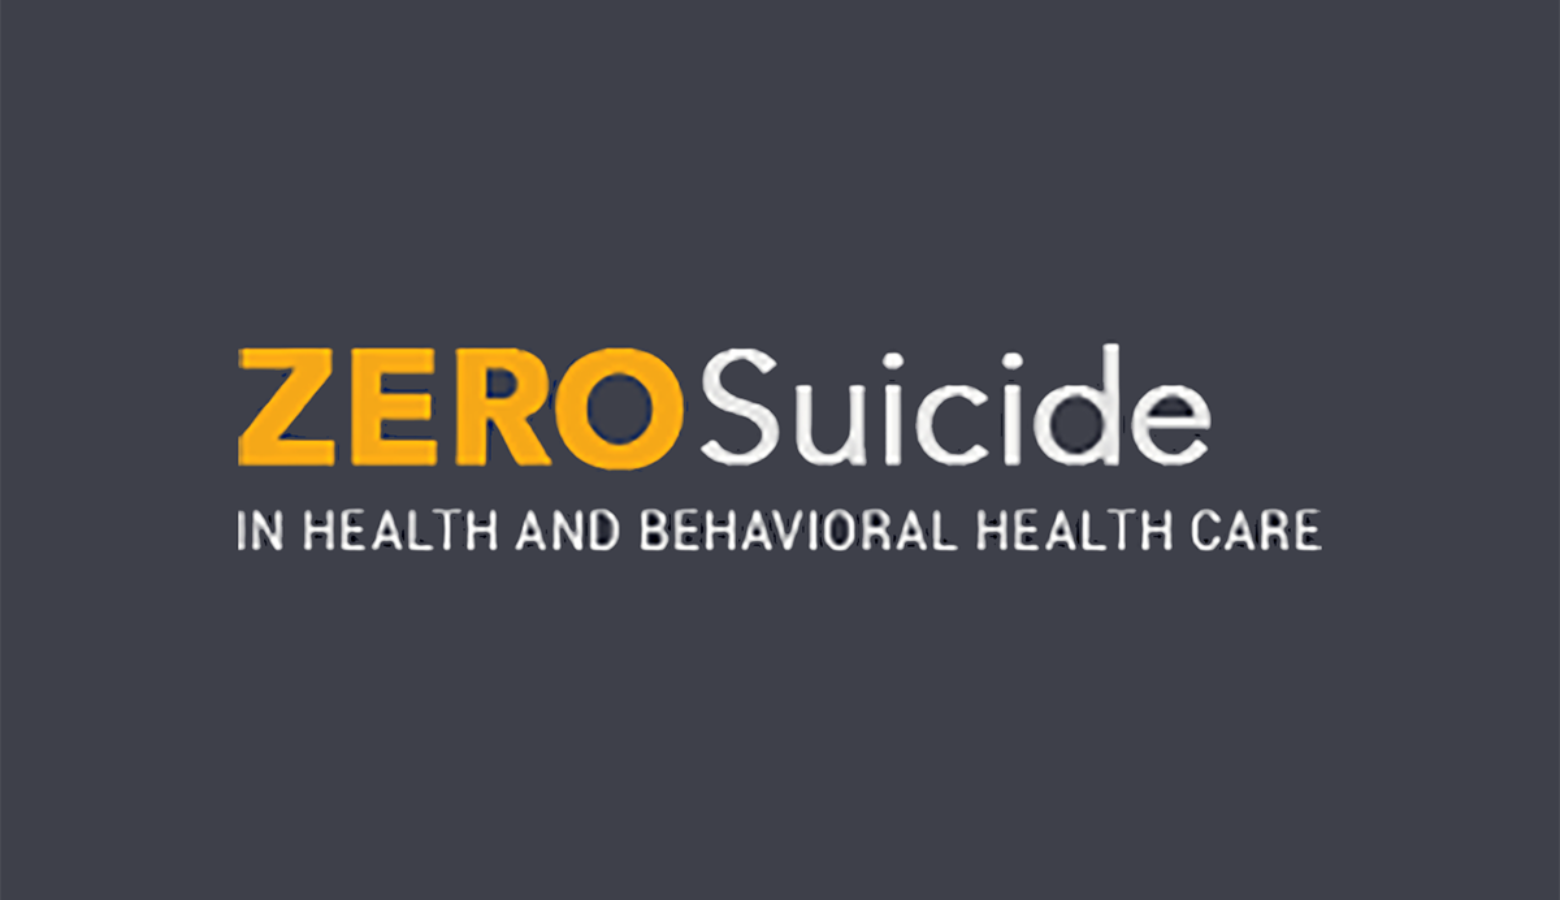 Indiana has one of the highest teen suicide rates in the country. (Photo courtesy of zerosuicide.sprc.org)